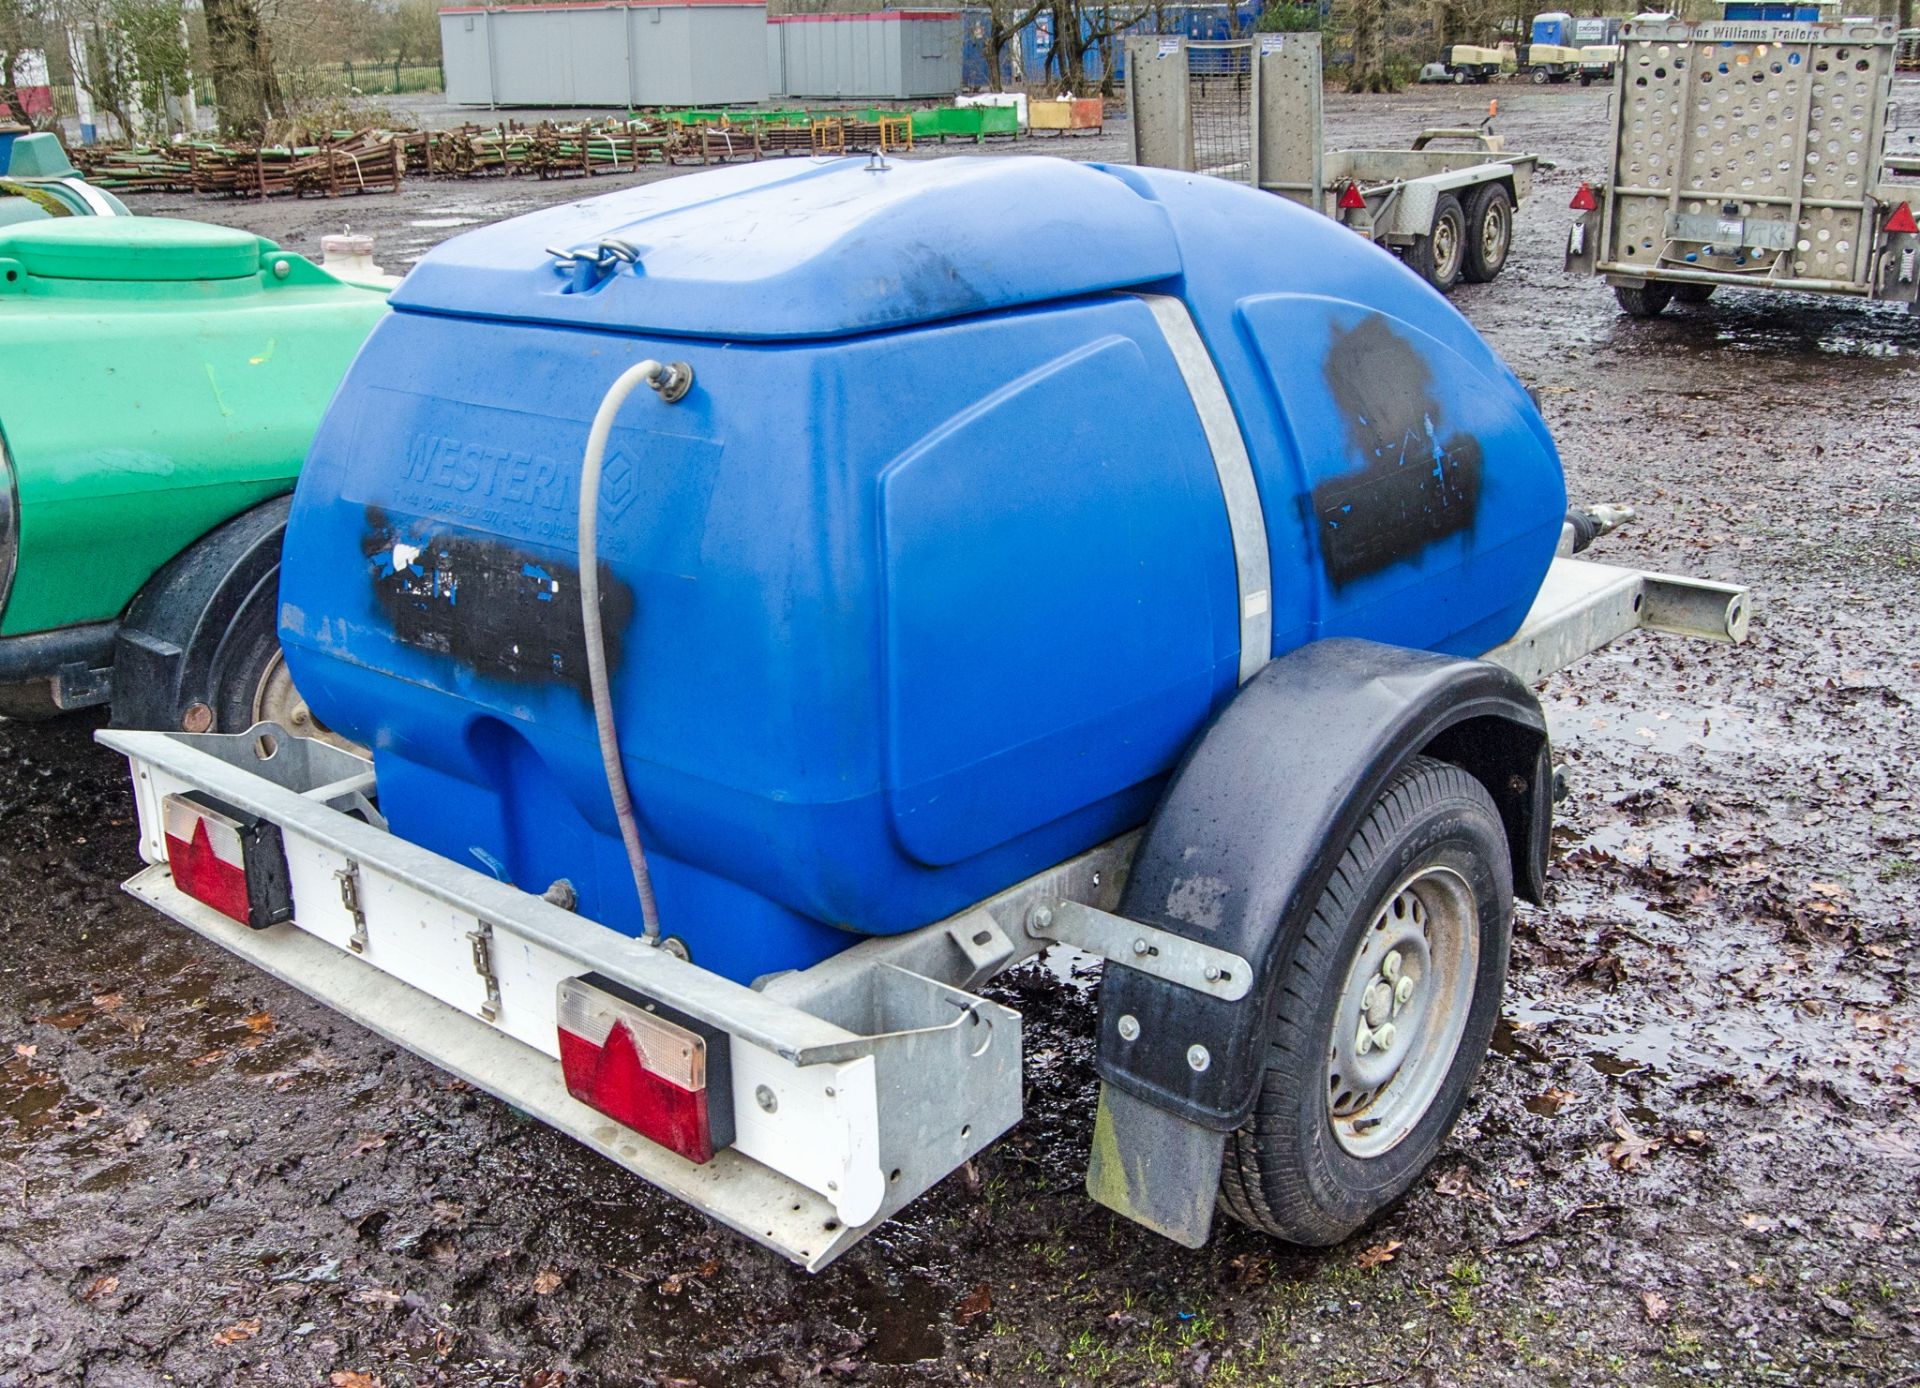 Western fast tow mobile water bowser A722122 - Image 2 of 4